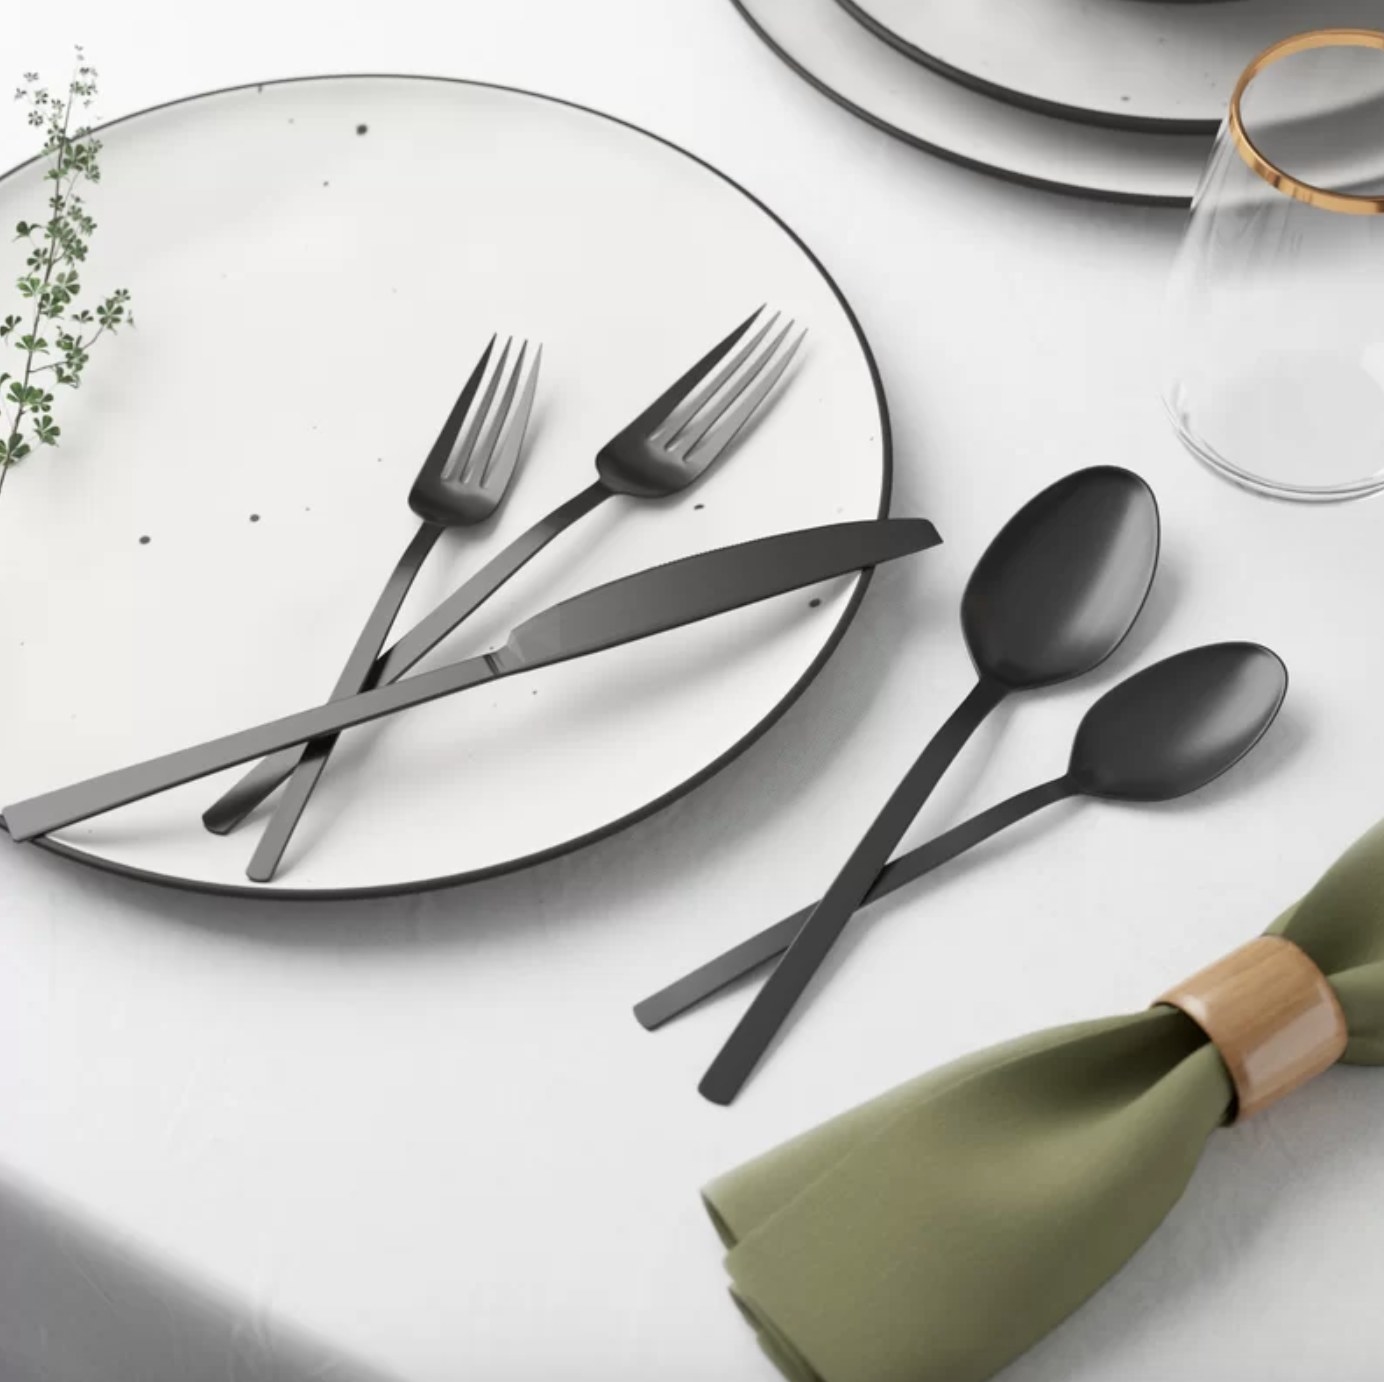 There is one black dinner fork, salad fork, dinner kife, soup spoon and a teaspoon laid across a white plate.